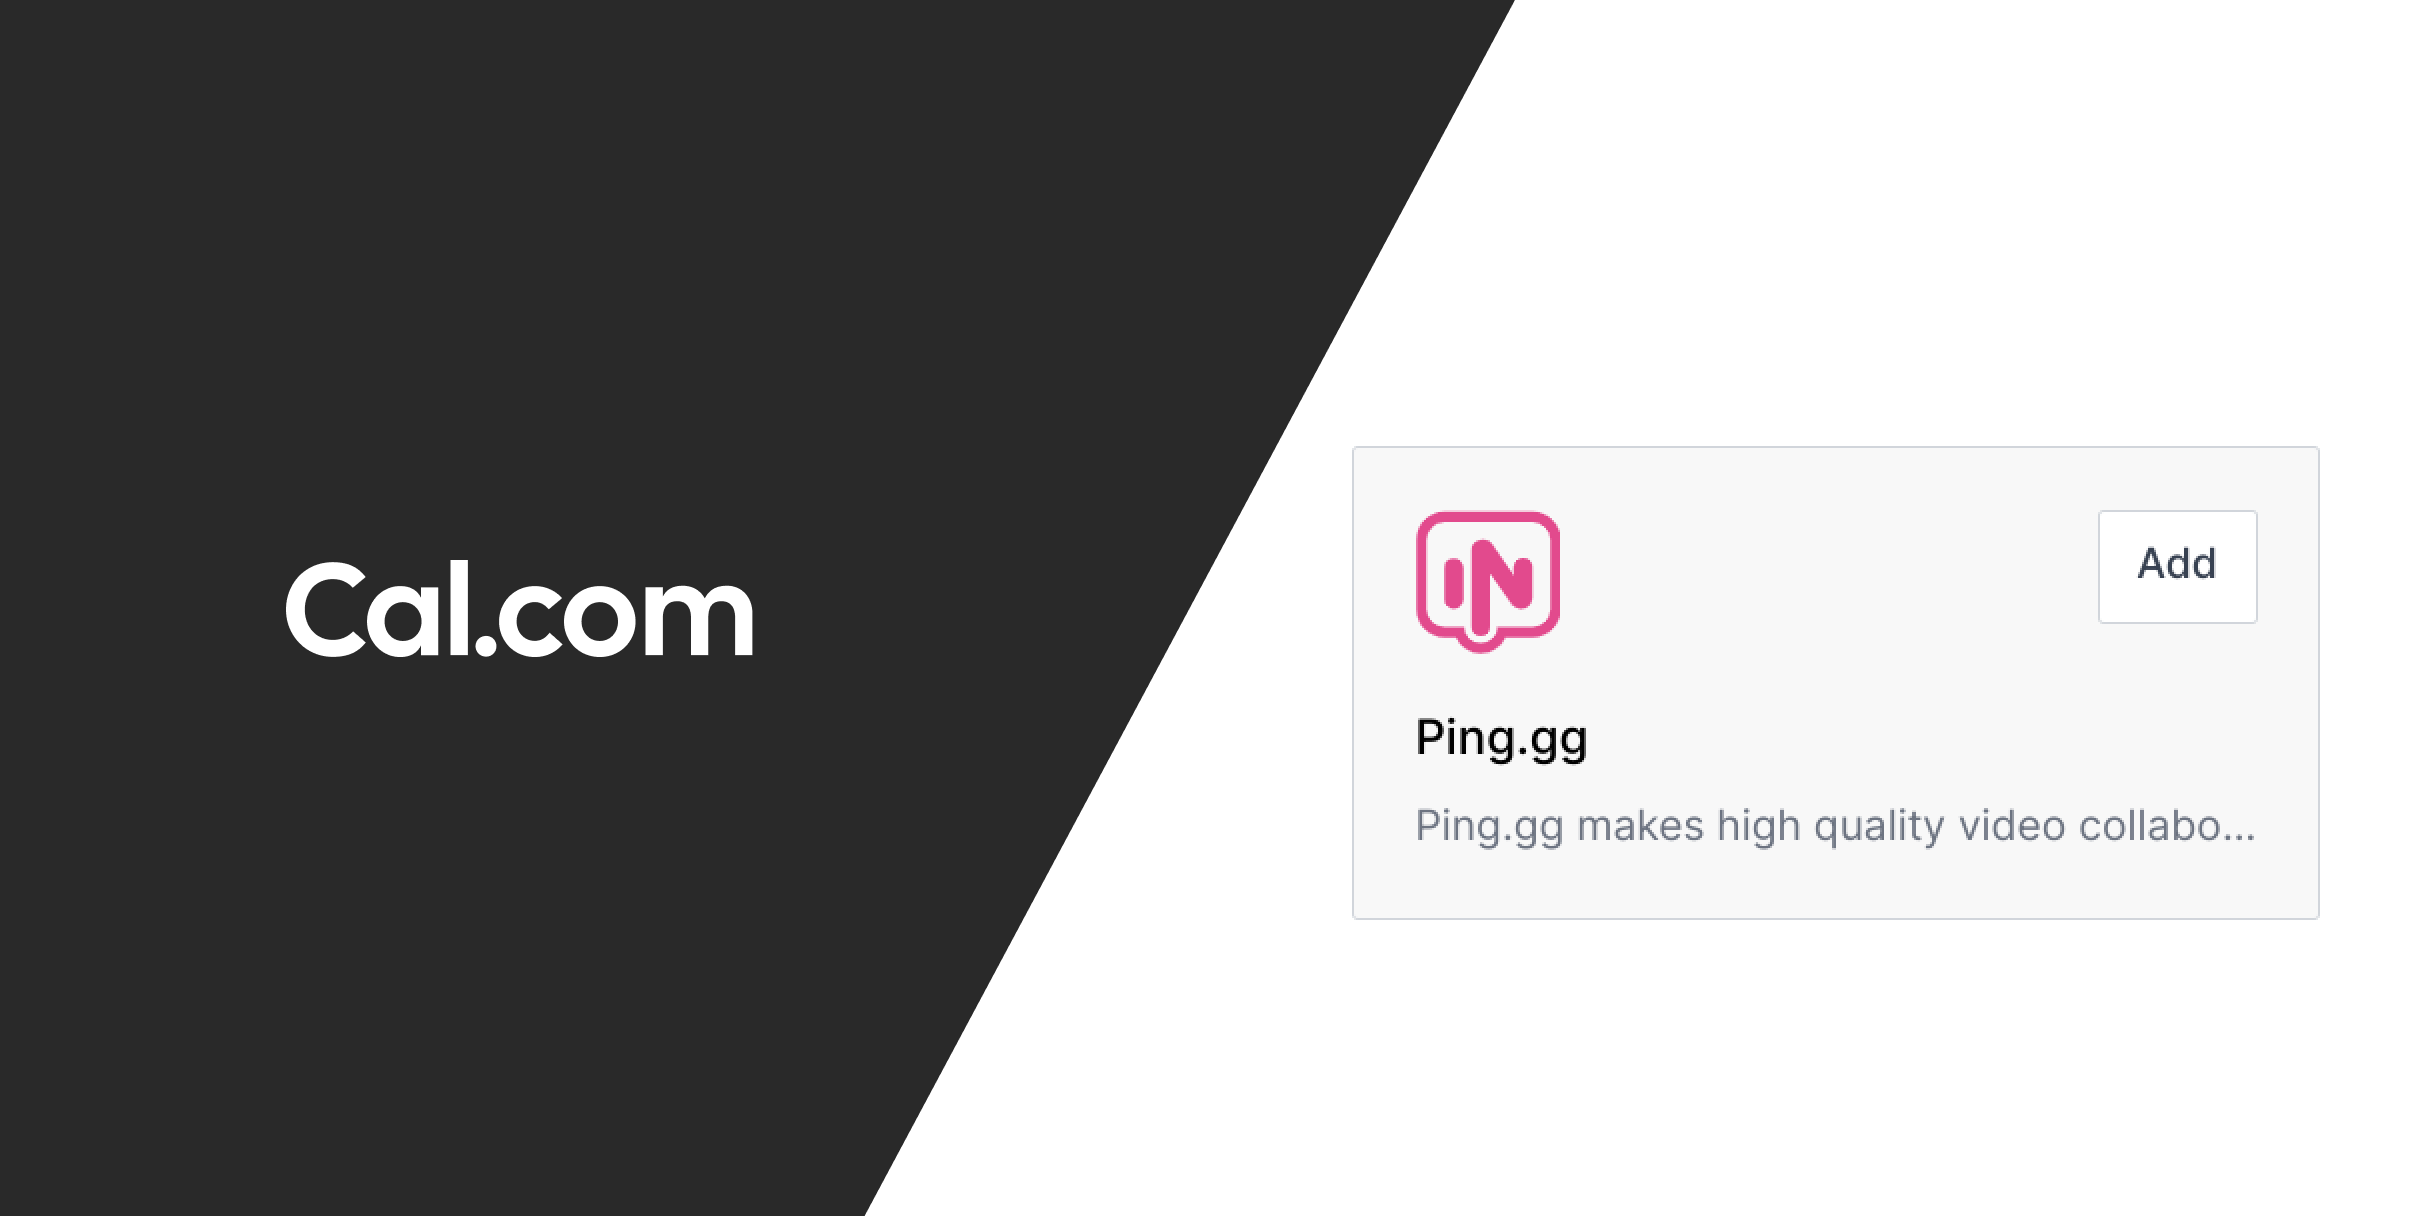 What is Ping.gg And Why It Makes Sense To Use It With Cal.com